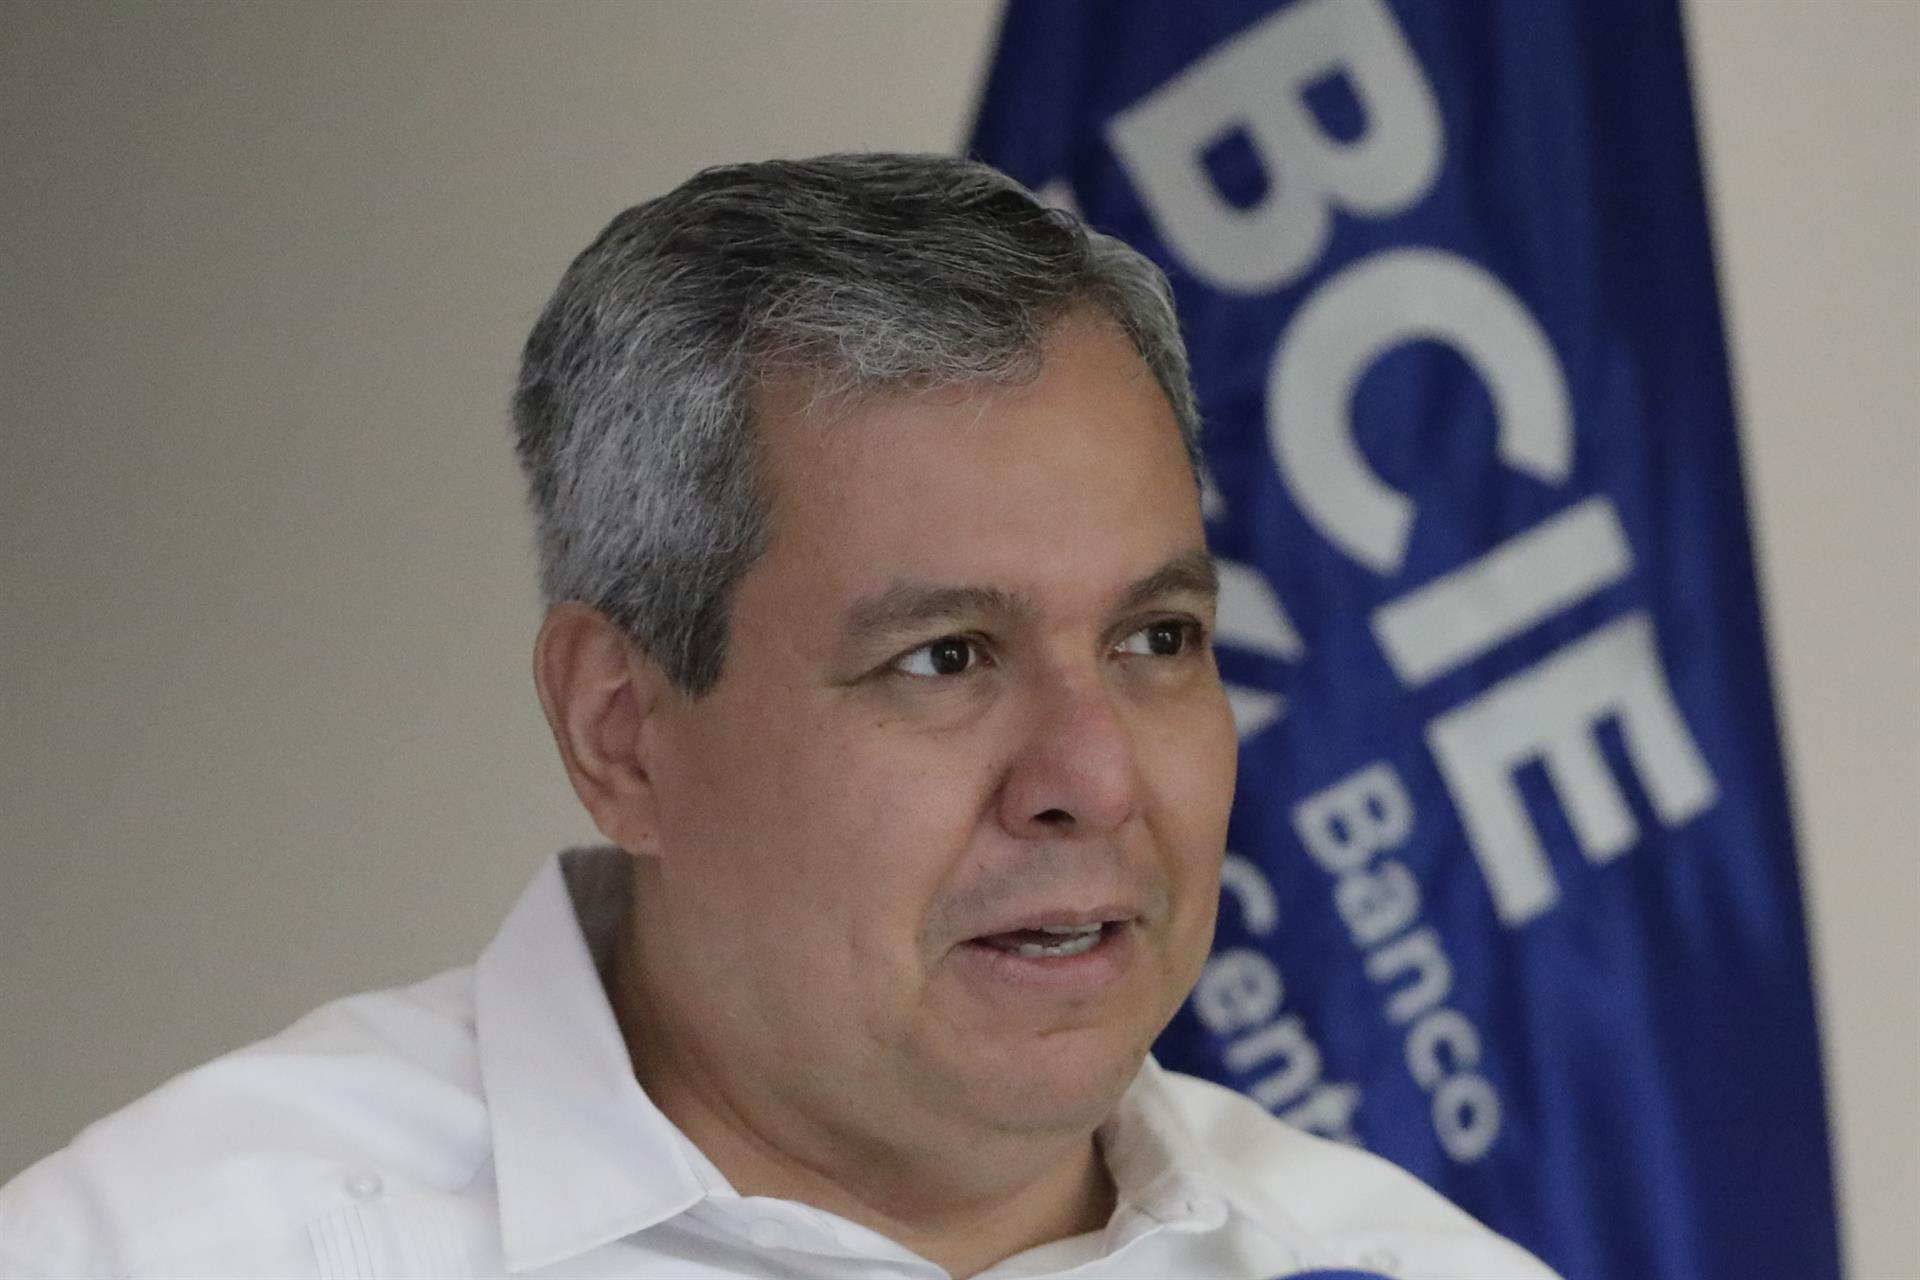 Opponents demand that CABEI not re-elect Mossi as president of the bank